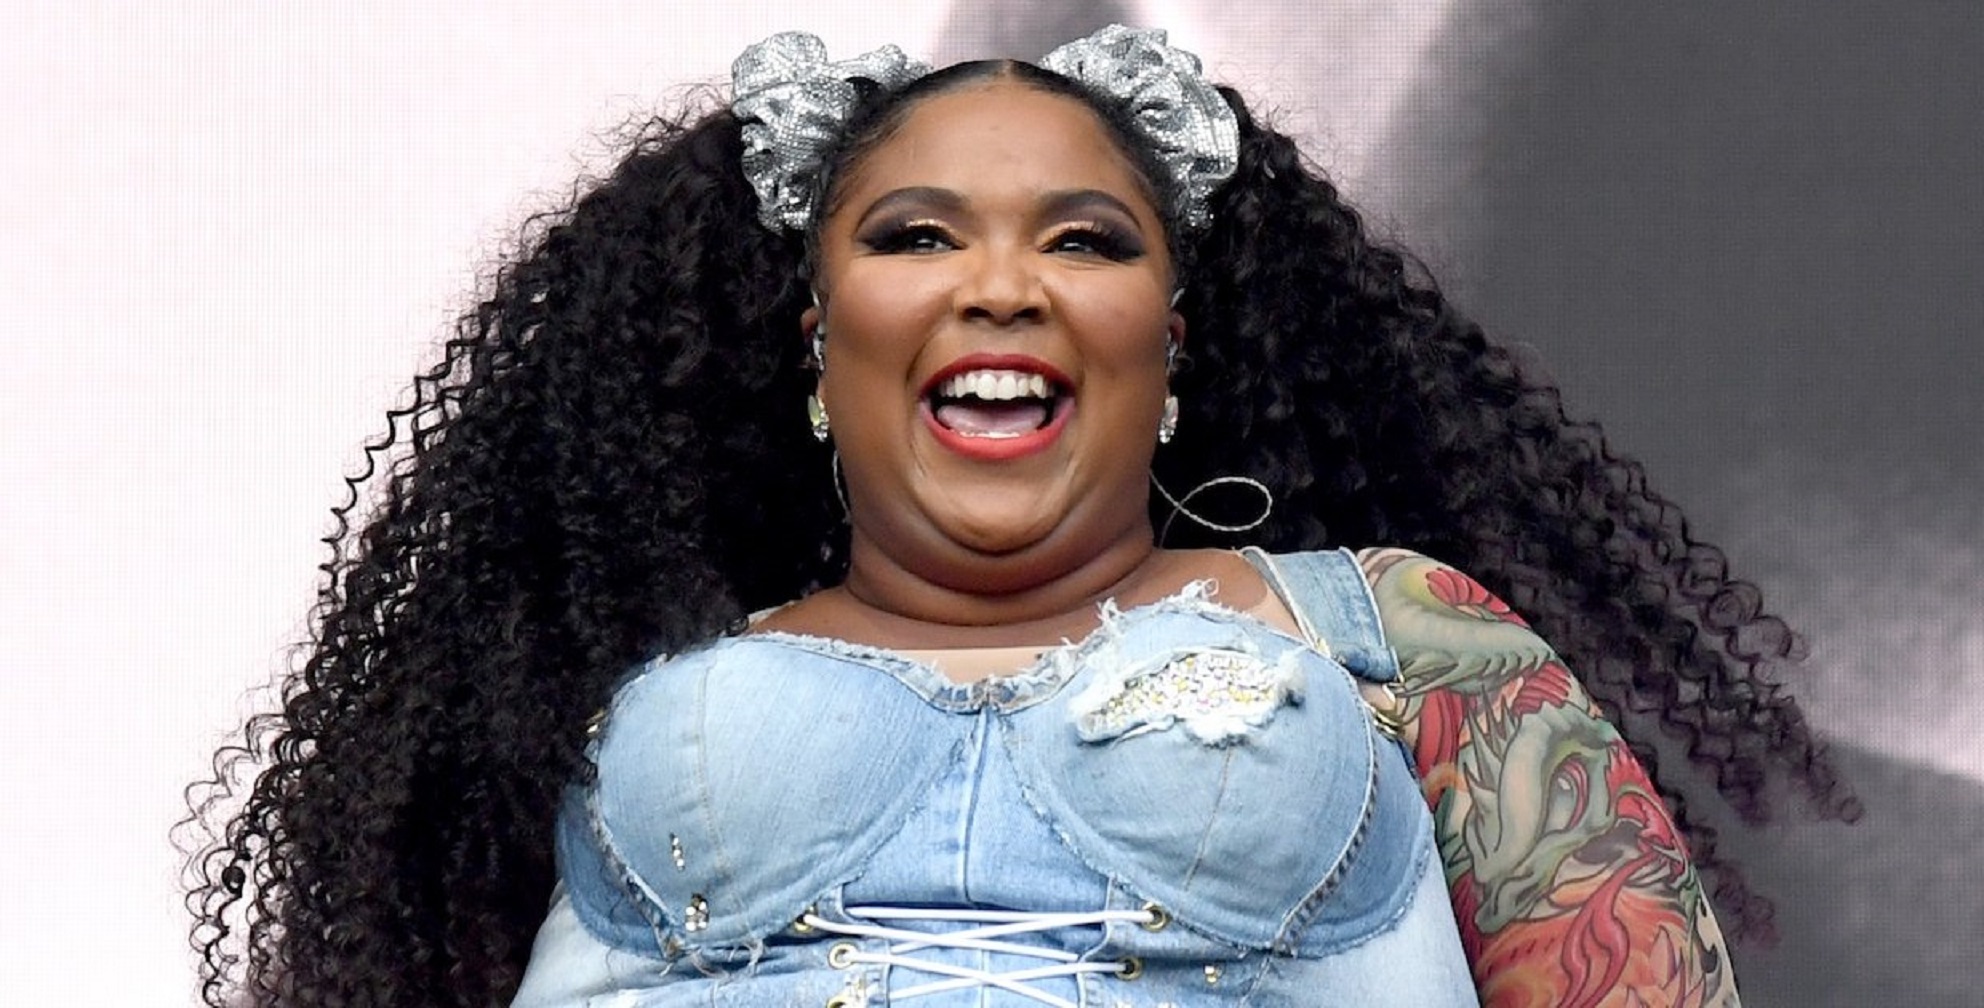 Lizzo Earns #1 Spot On Billboard Hot 100 As Her Single ‘About Damn Time’ Tops The Charts!